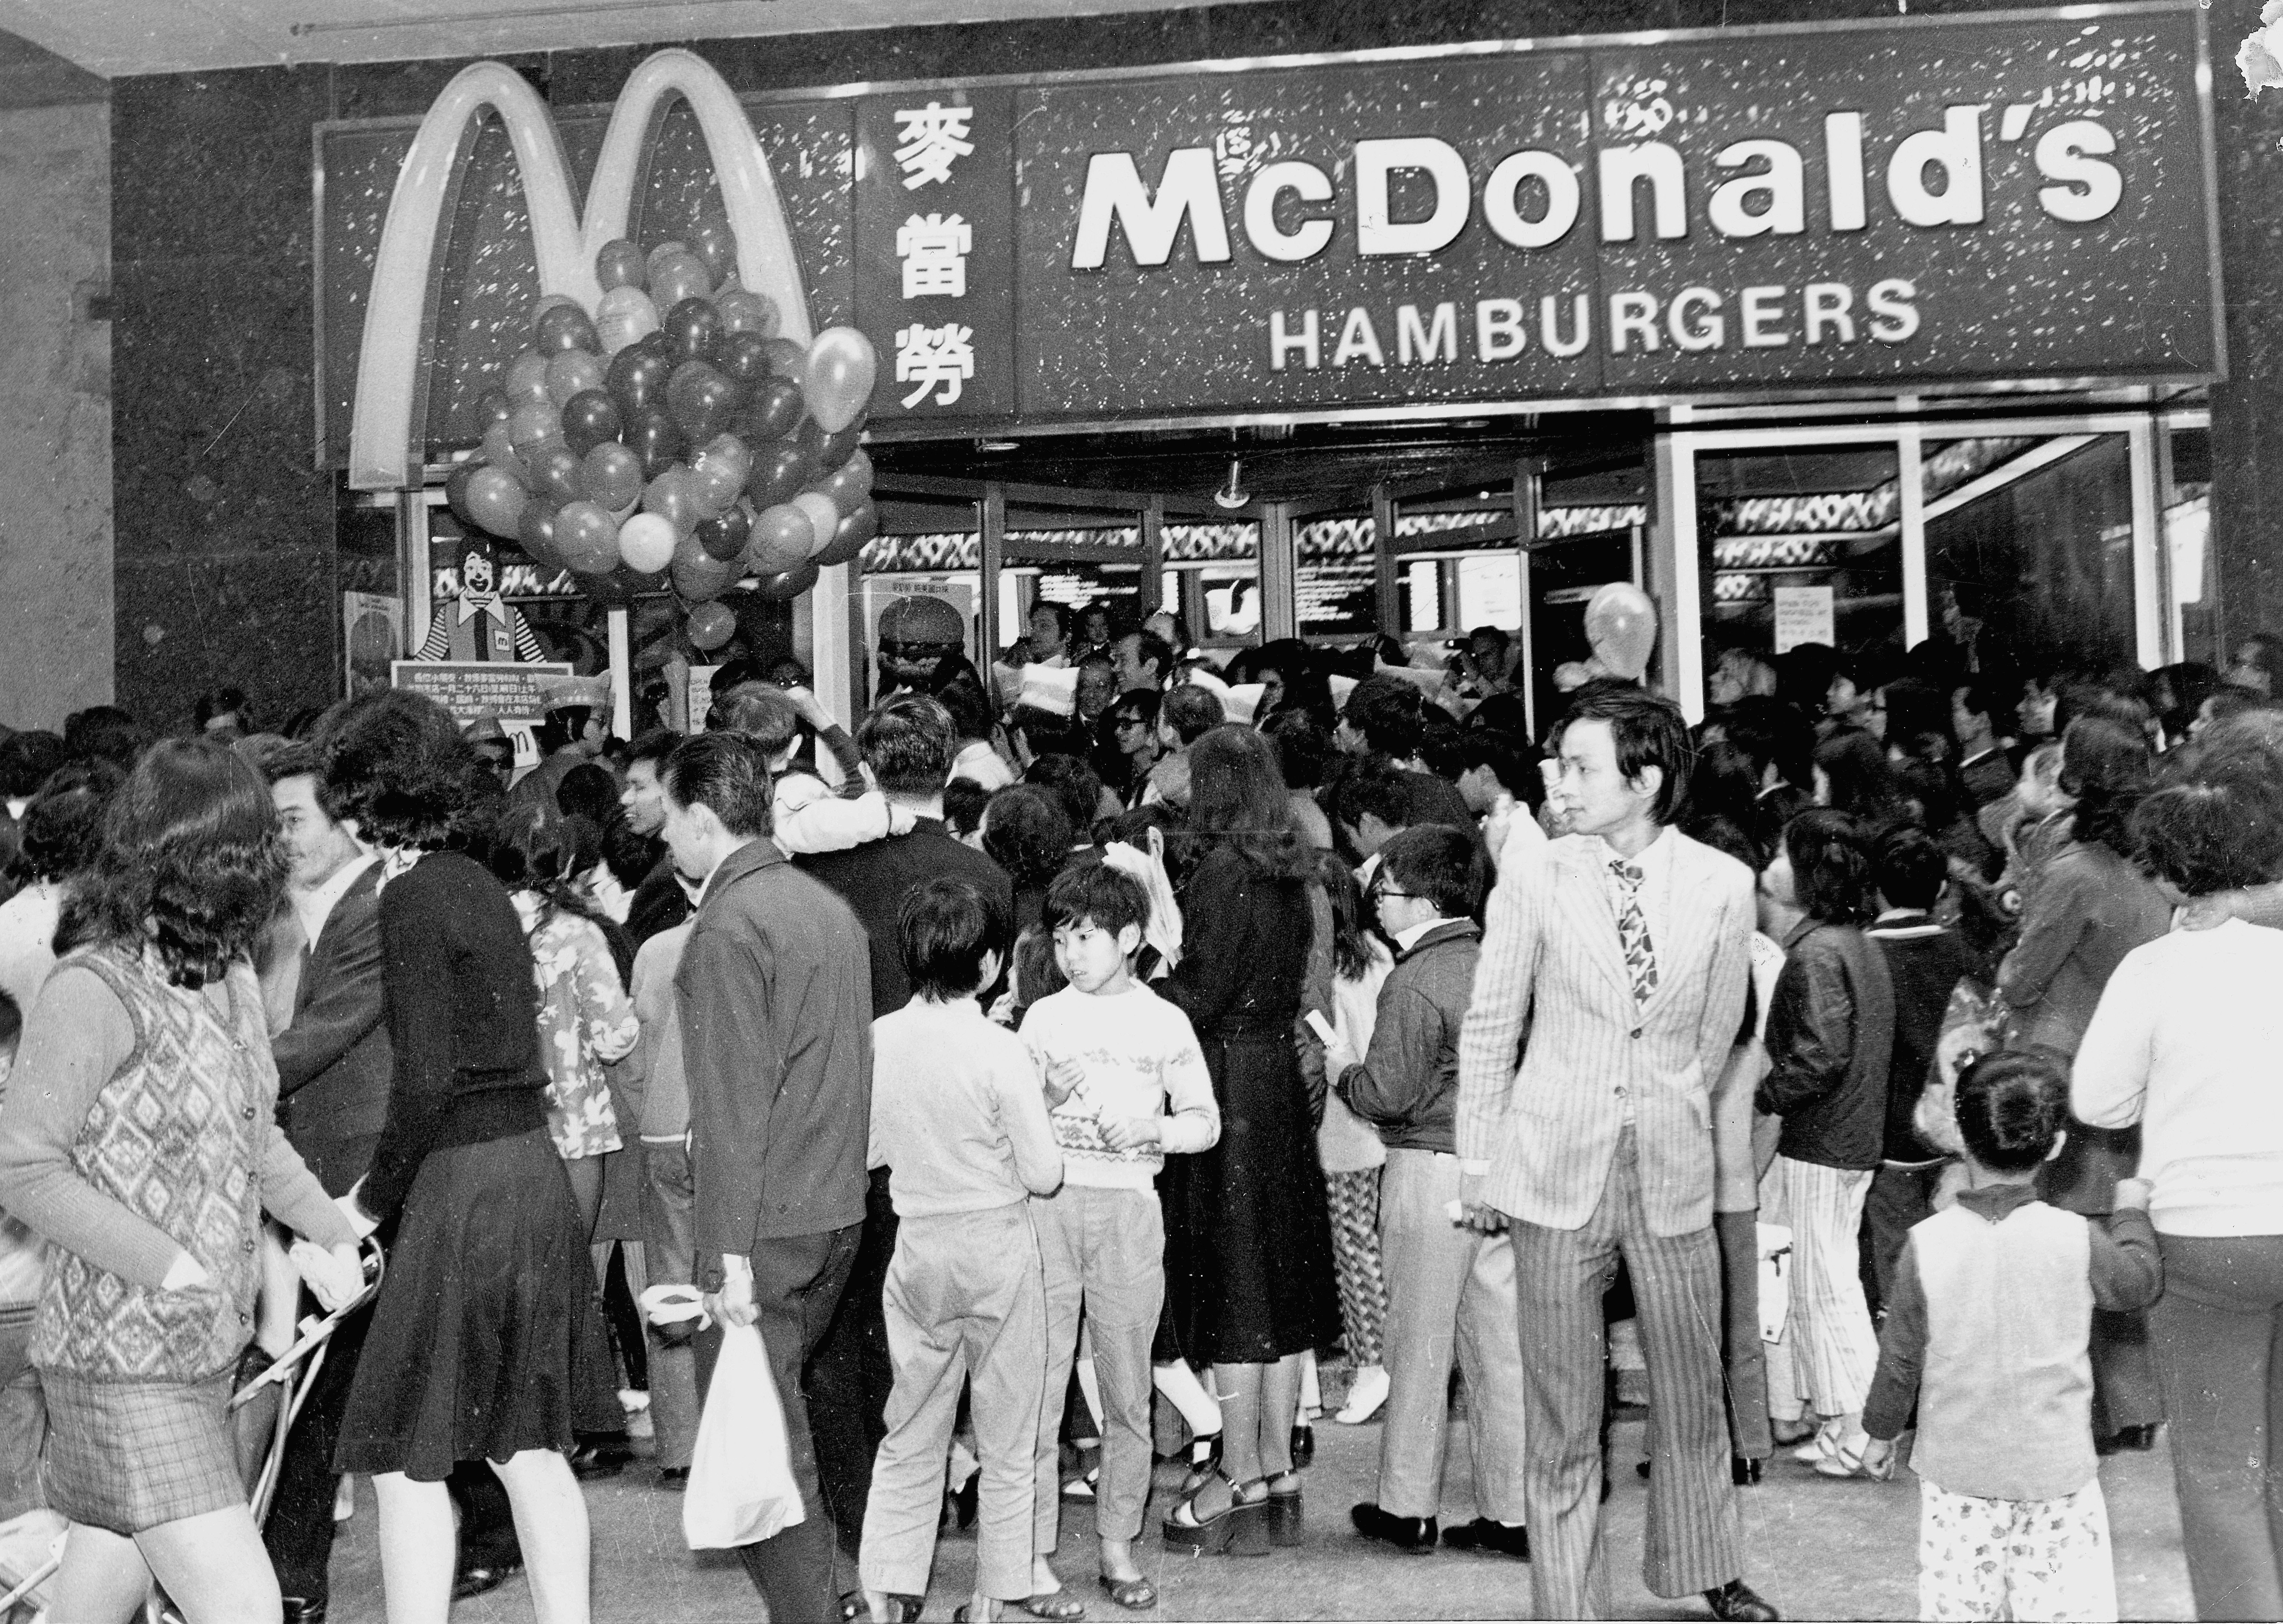 Hong Kong’s first McDonald's officially opened on January 26, 1975, in Causeway Bay.